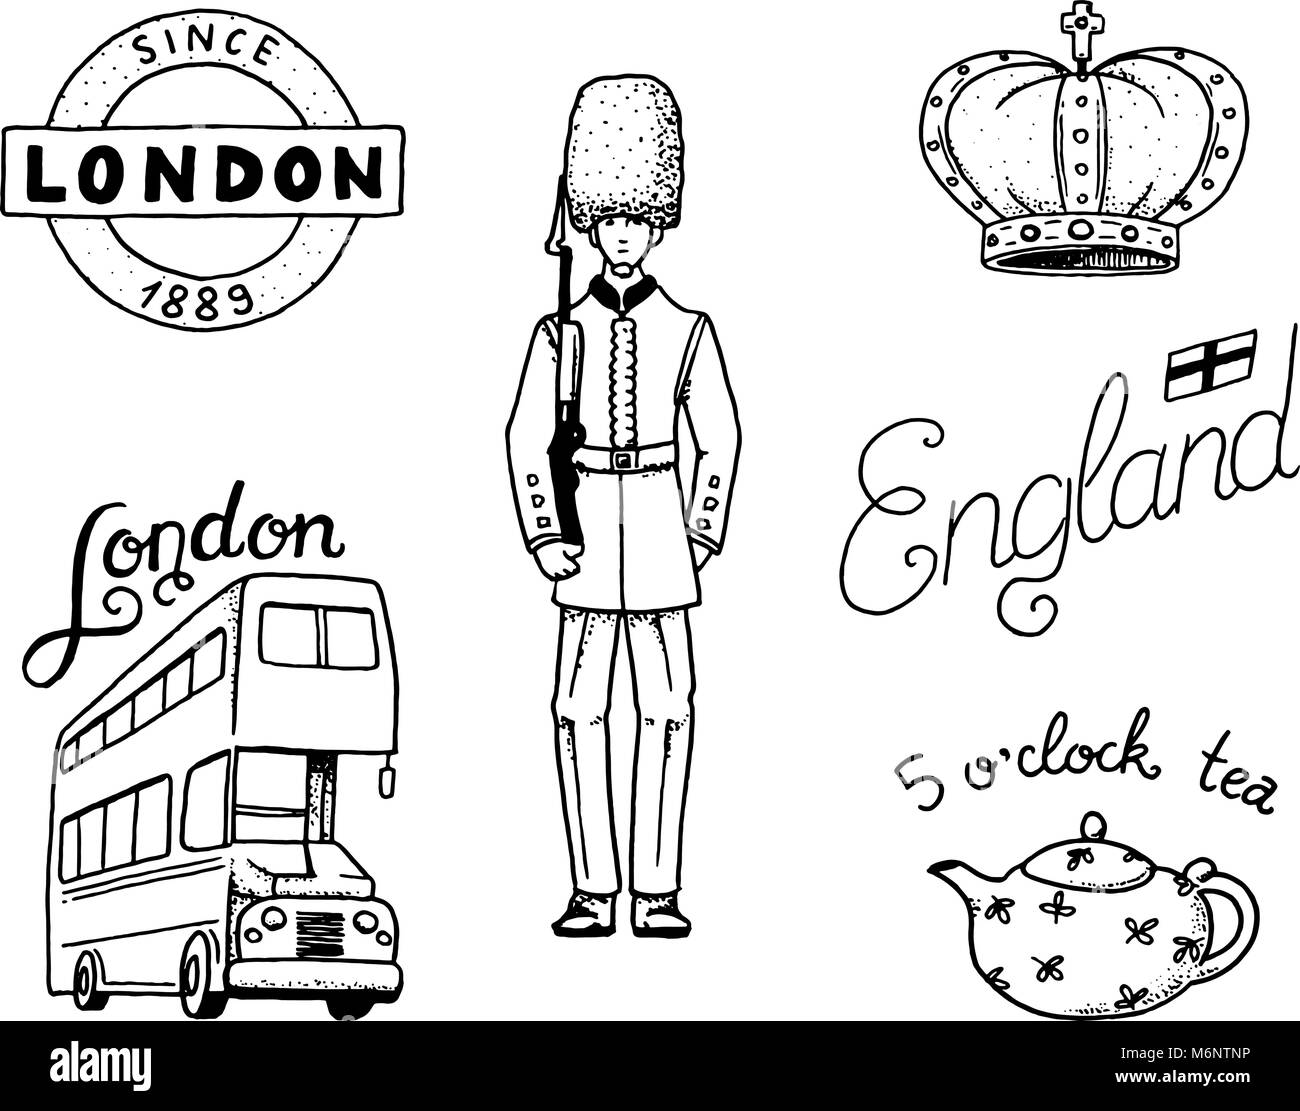 British Logo, Crown and Queen, teapot with tea, bus and royal guard, London and the gentlemen. symbols, badges or stamps, emblems or architectural landmarks, United Kingdom. Country England label. Stock Vector